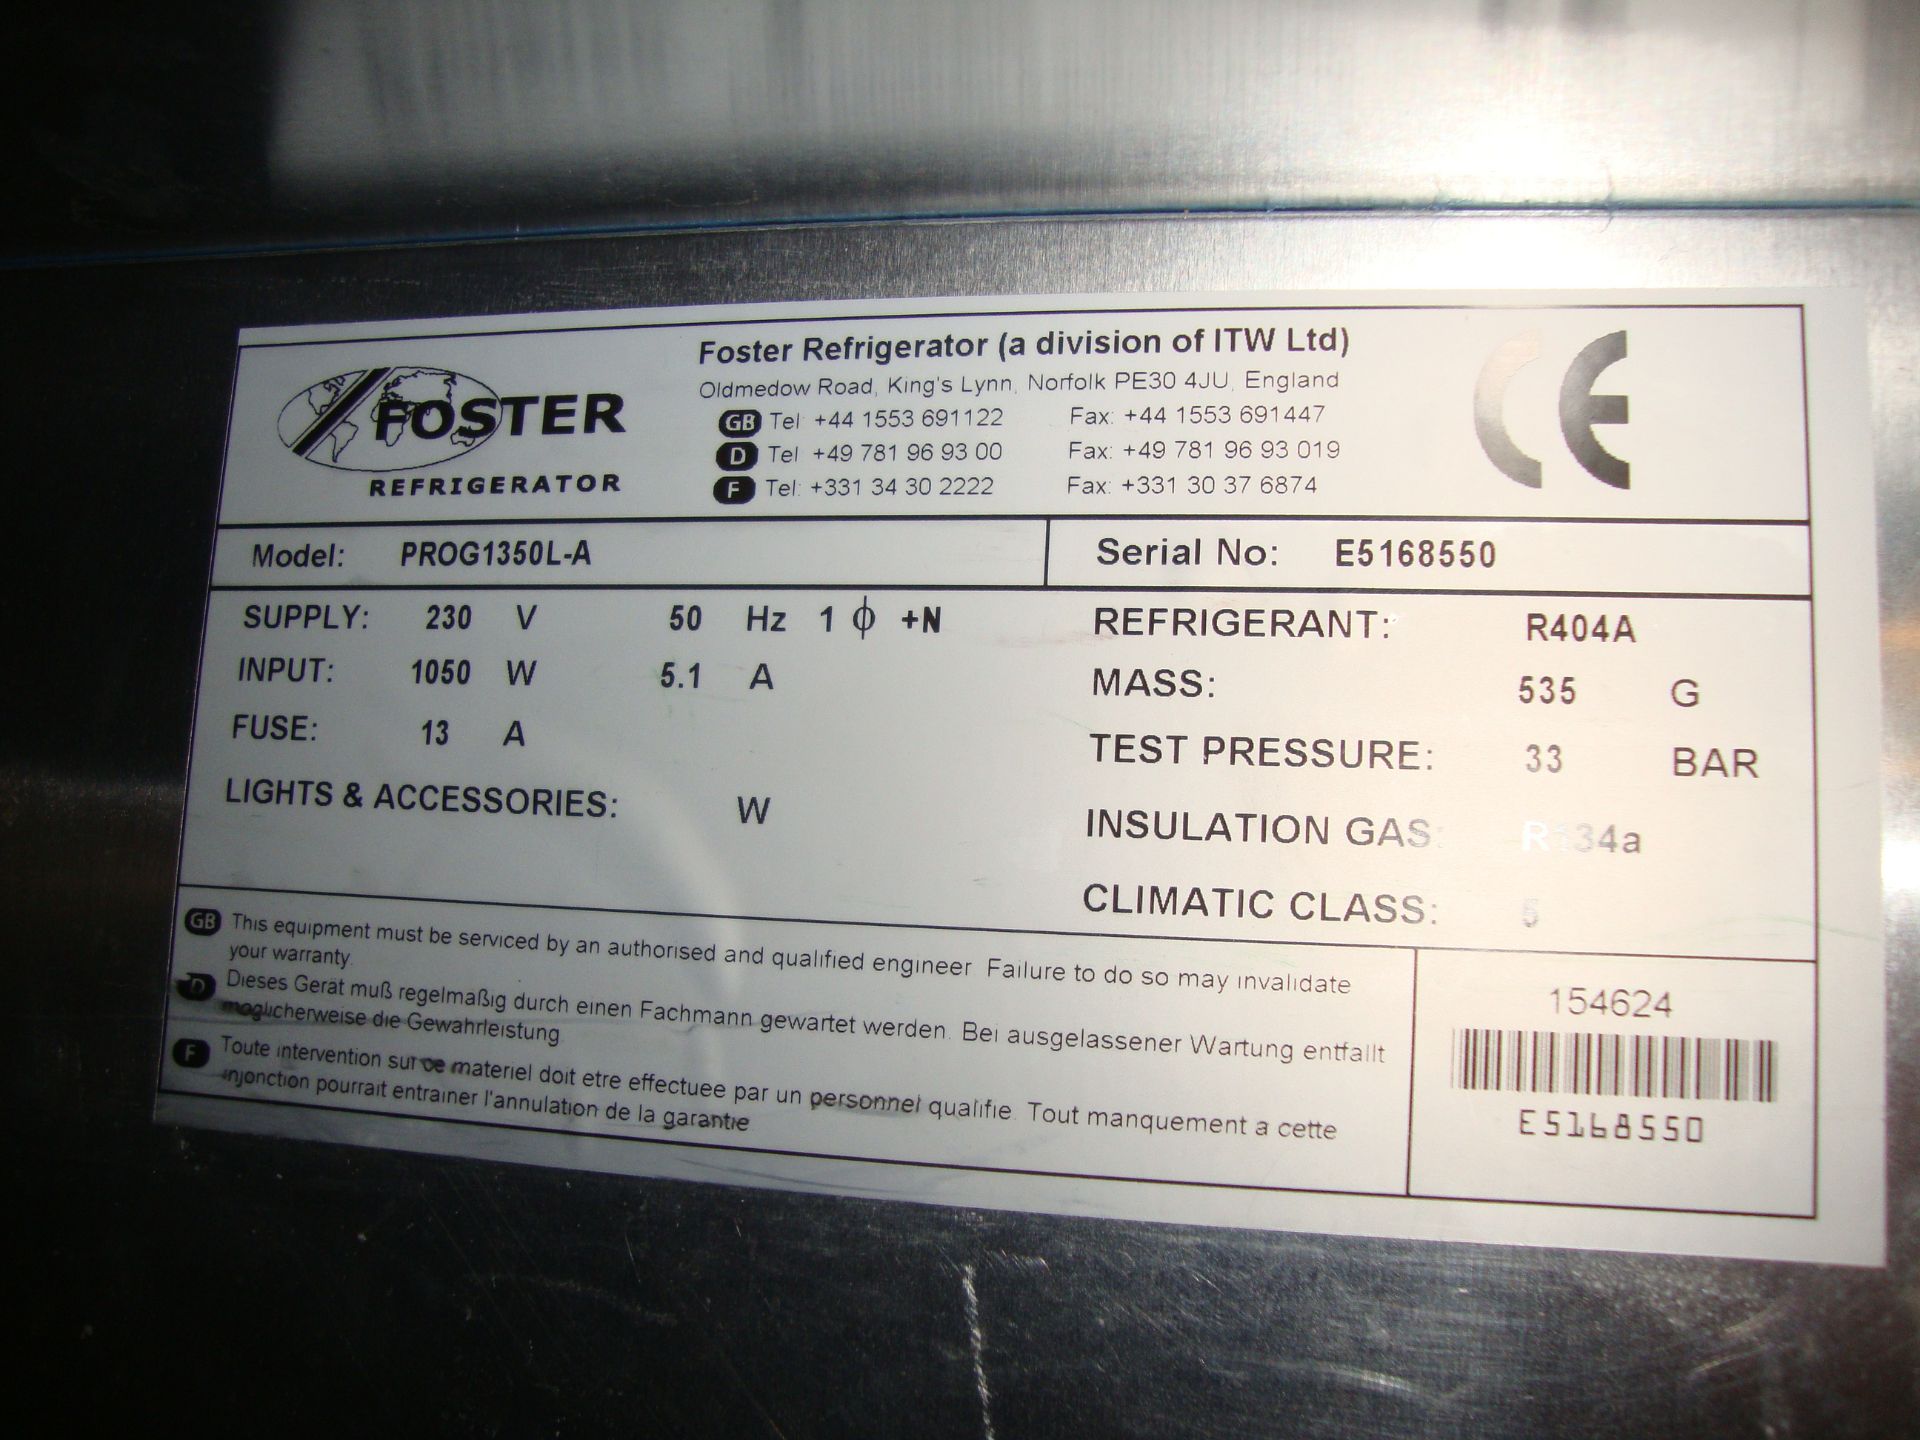 Foster large stainless steel mobile twin door freezer, model PROG1350L-A - Image 3 of 5